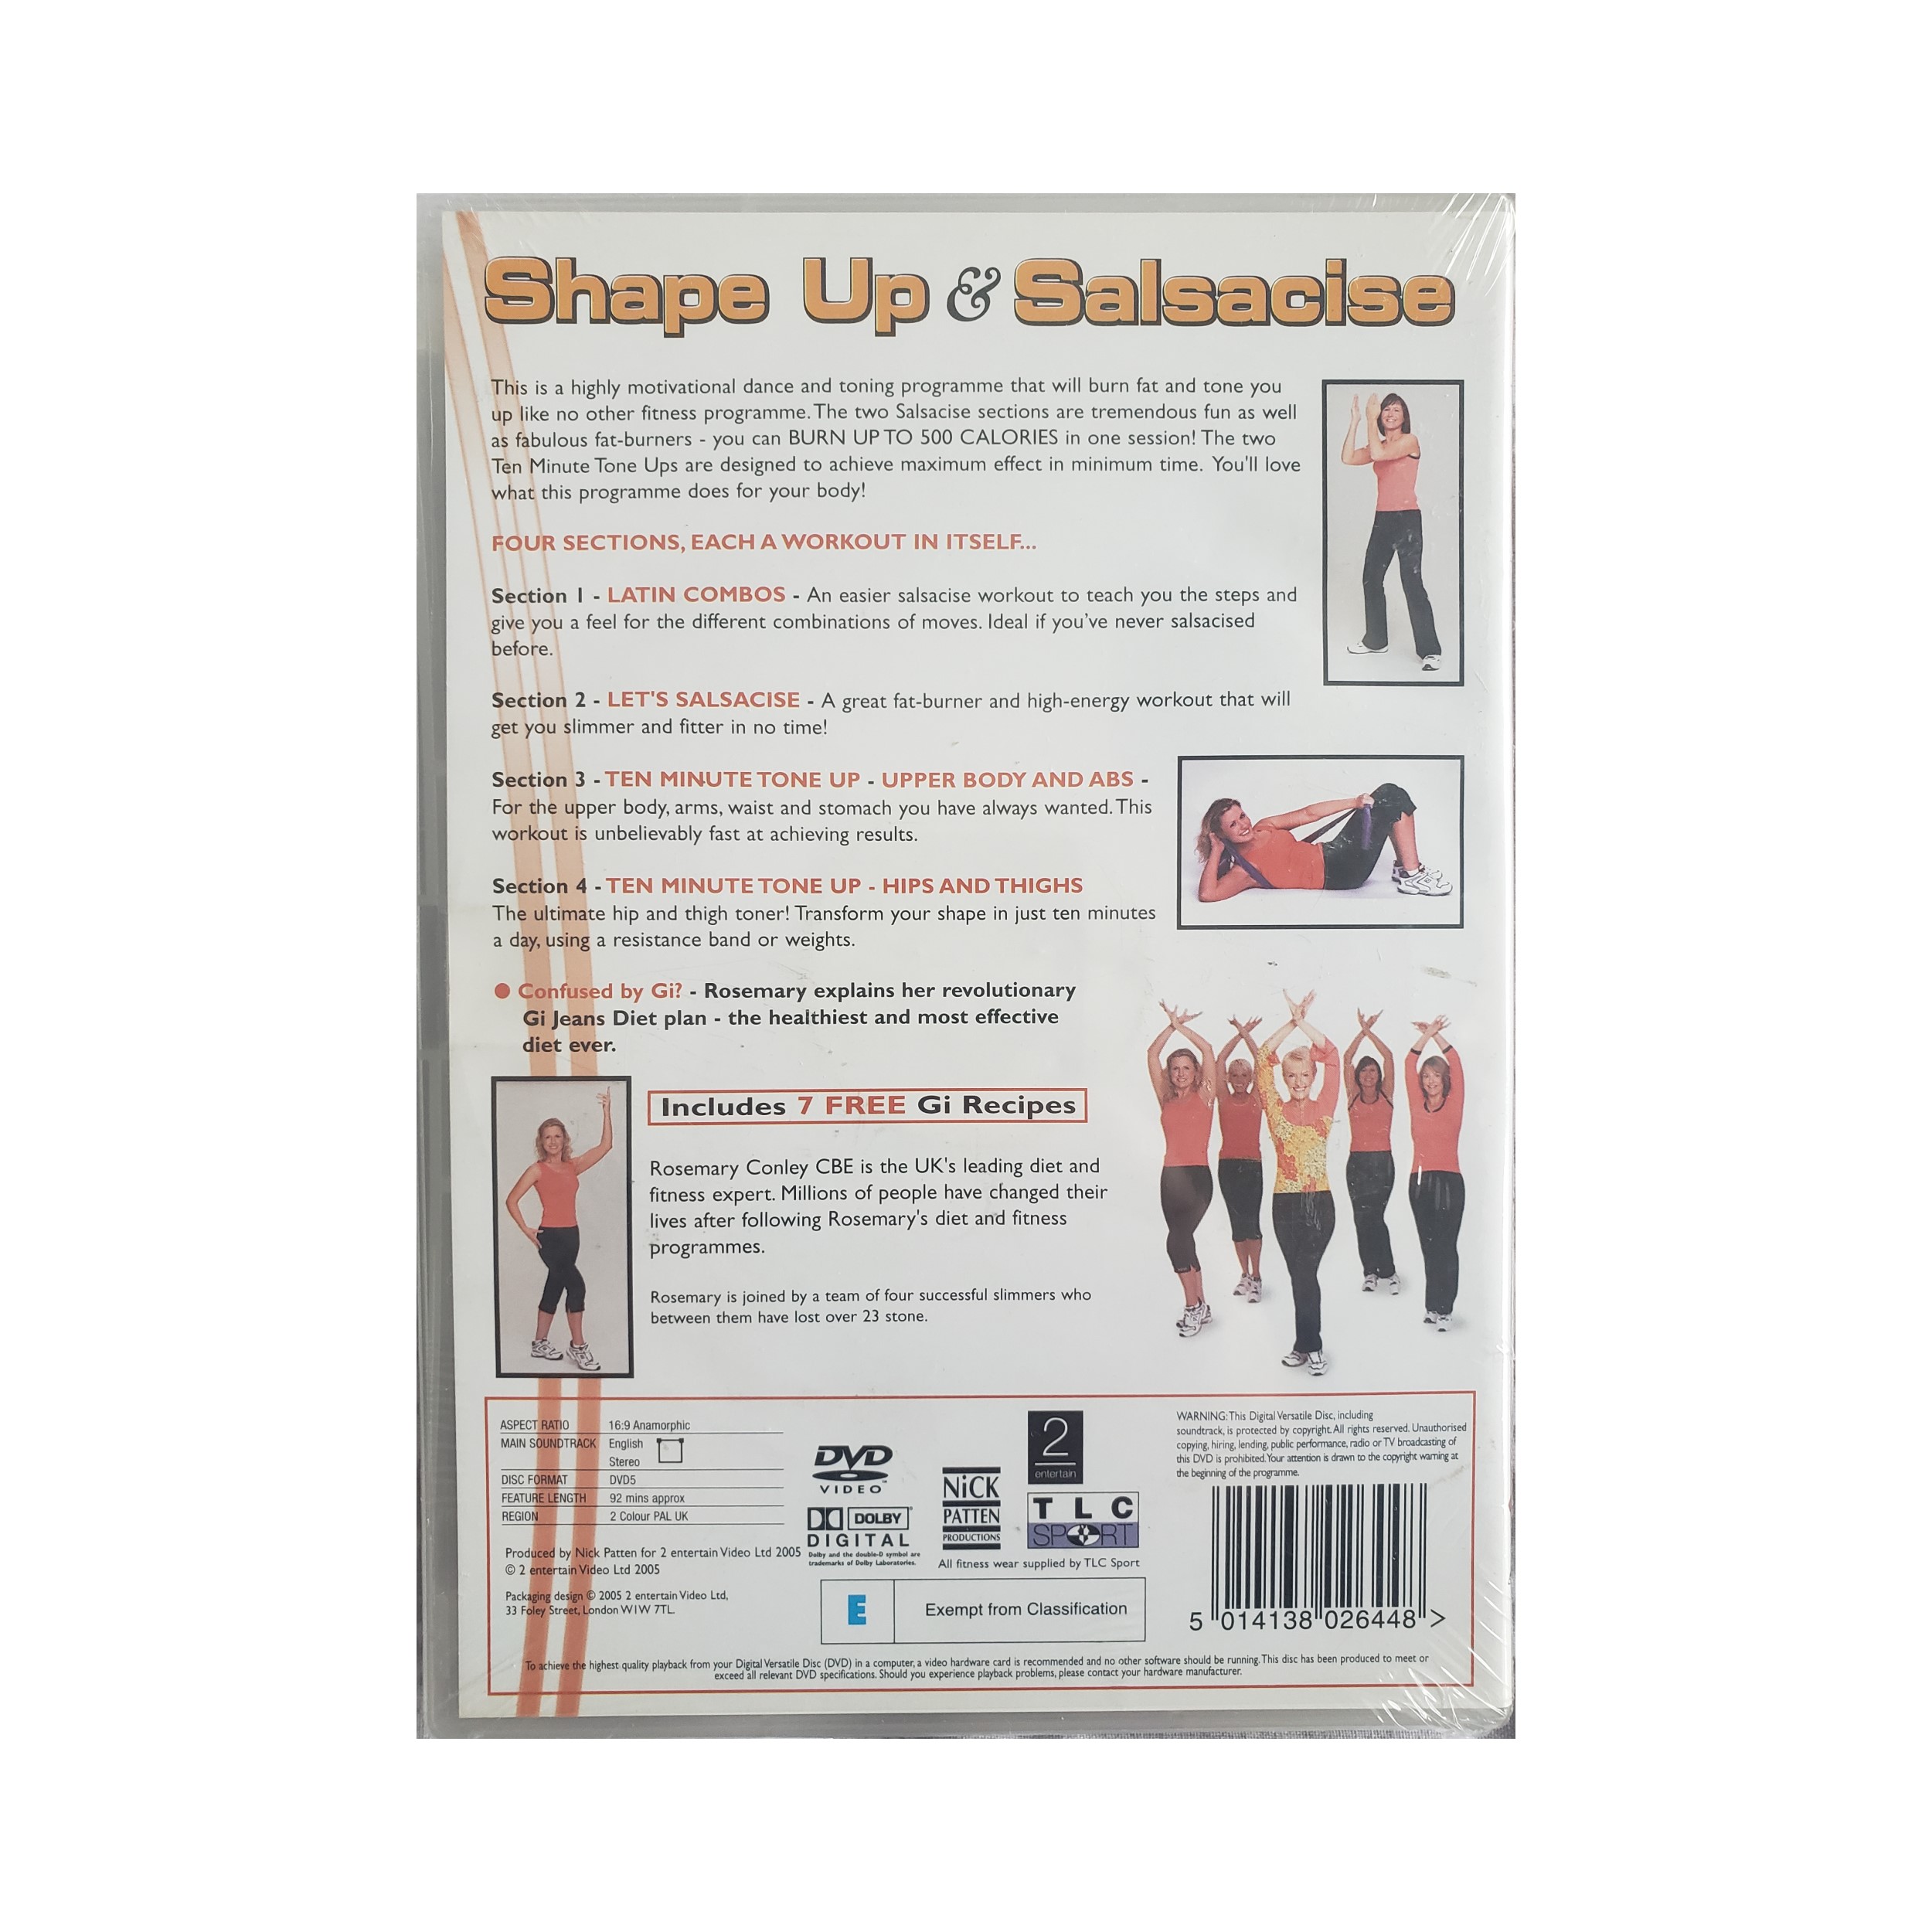 Image of the back cover of Rosemary Conley's Shape up and Salsacise DVD